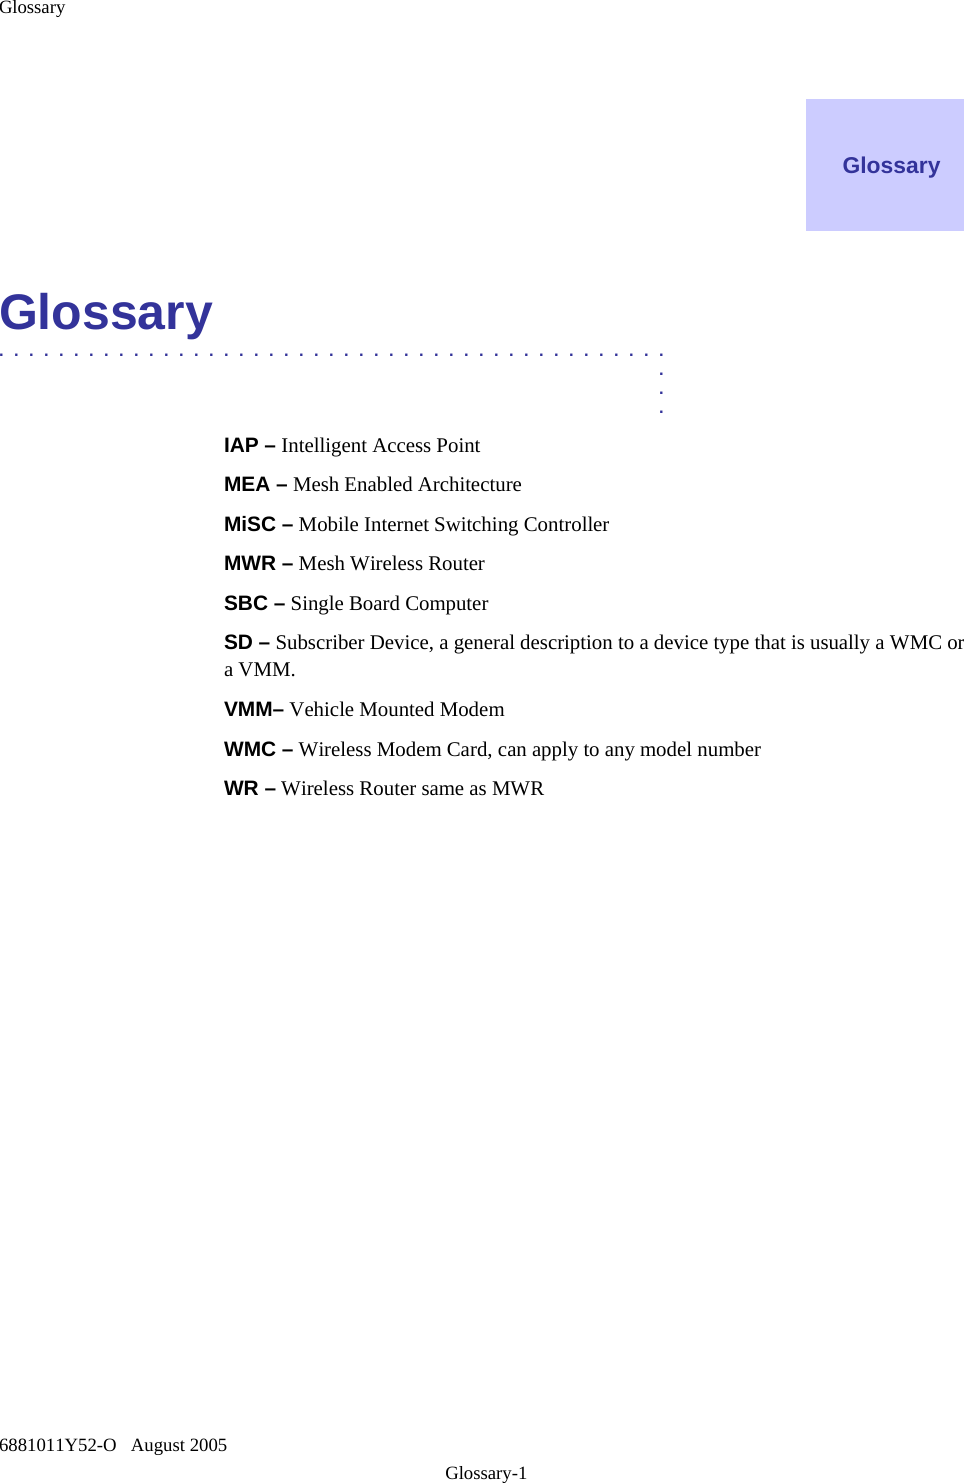 Glossary 6881011Y52-O   August 2005 Glossary-1    Glossary    Glossary  .............................................  .  .  . IAP – Intelligent Access Point   MEA – Mesh Enabled Architecture MiSC – Mobile Internet Switching Controller MWR – Mesh Wireless Router SBC – Single Board Computer SD – Subscriber Device, a general description to a device type that is usually a WMC or a VMM. VMM– Vehicle Mounted Modem WMC – Wireless Modem Card, can apply to any model number WR – Wireless Router same as MWR  